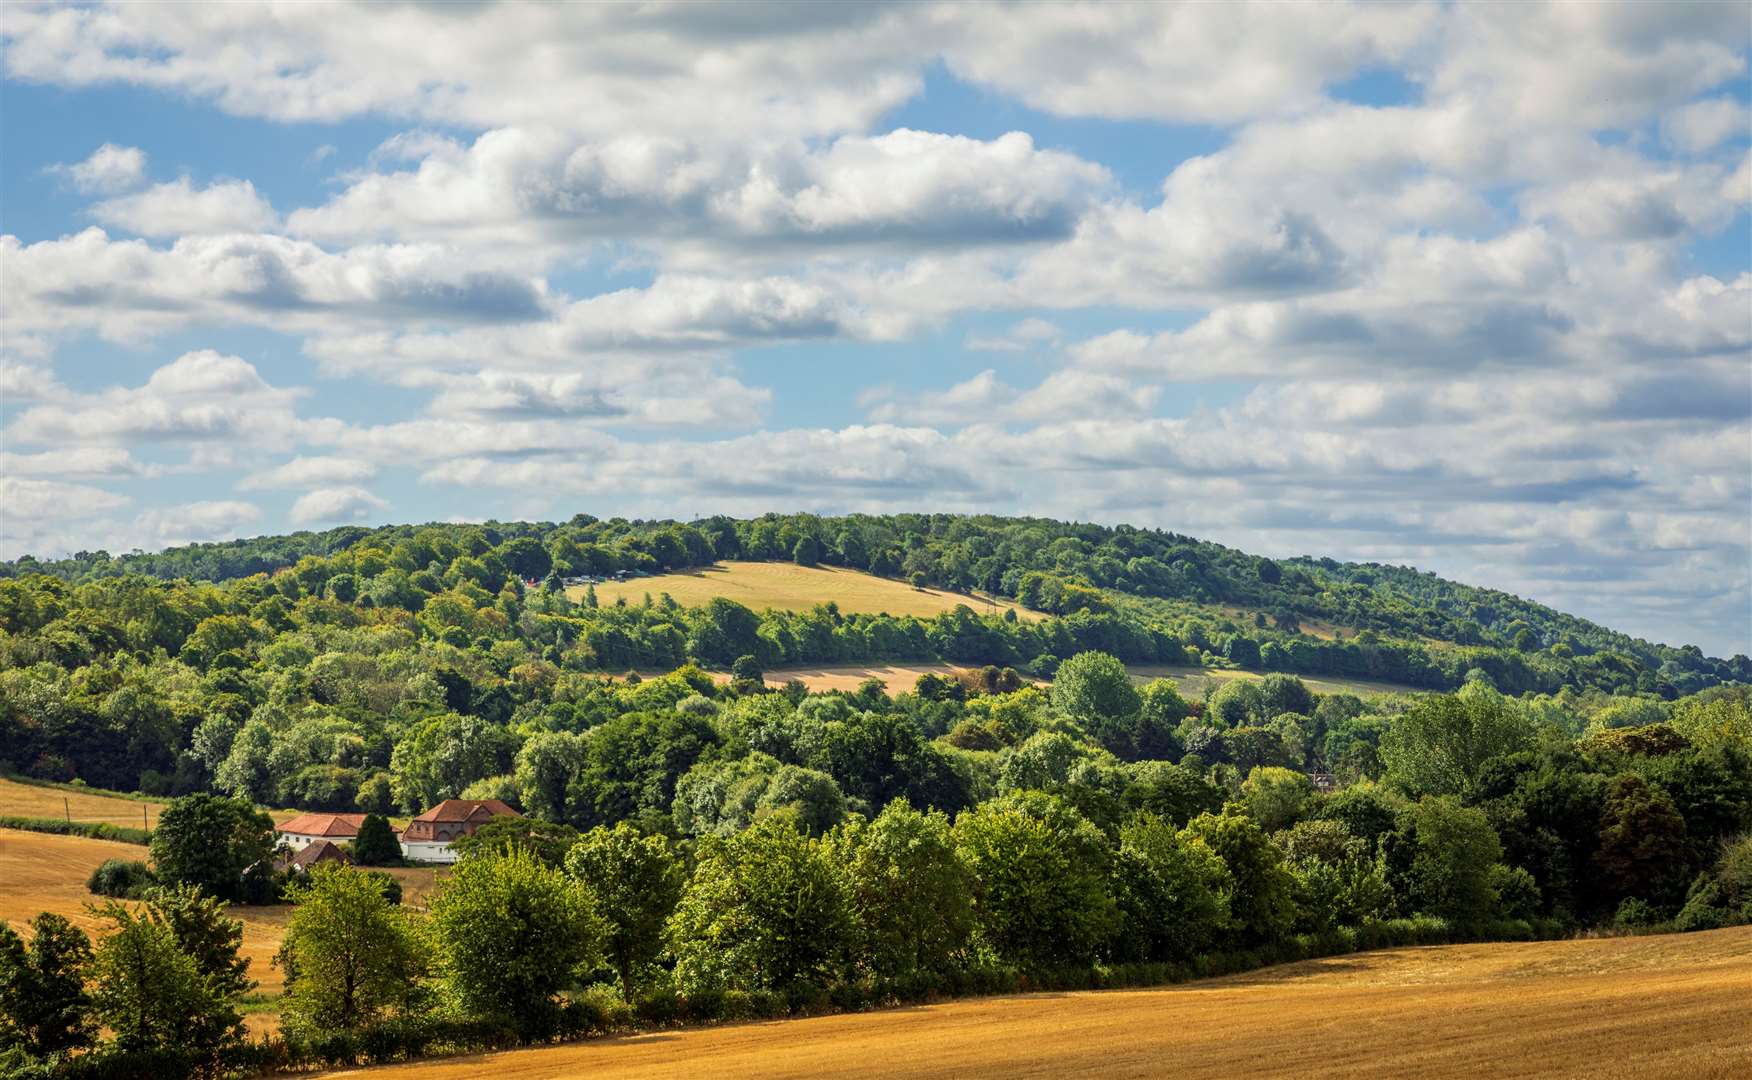 Capture views of the Kent Downs from Lullingstone Park. Picture: iStock